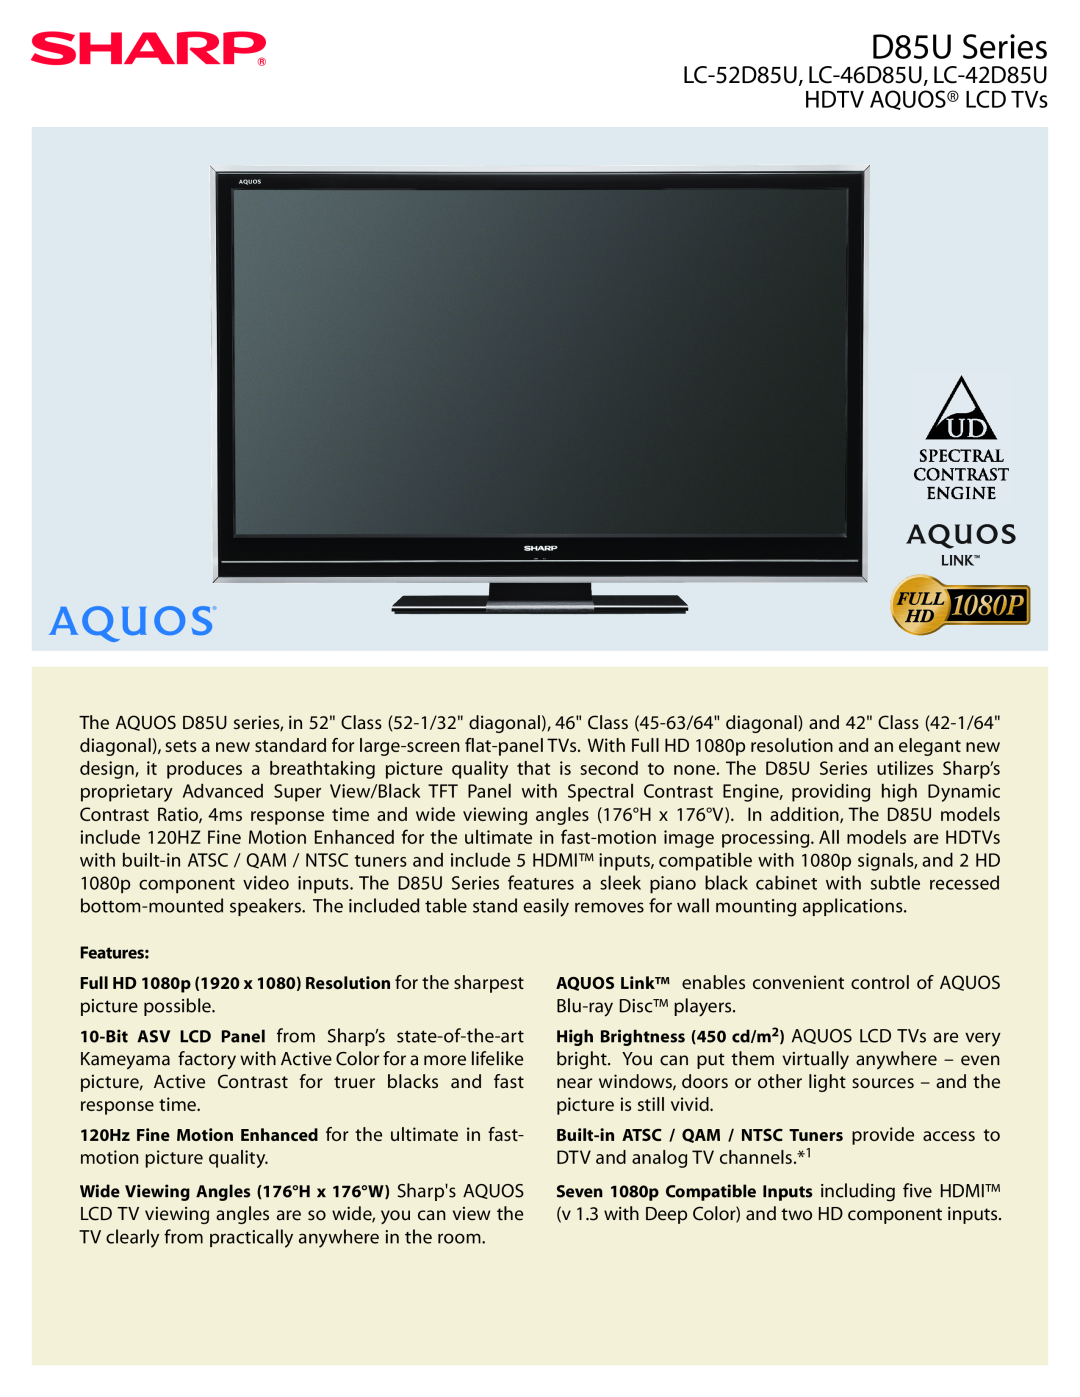 Sharp D85U Series manual LC-52D85U, LC-46D85U, LC-42D85U HDTV AQUOS LCD TVs, motion picture quality 